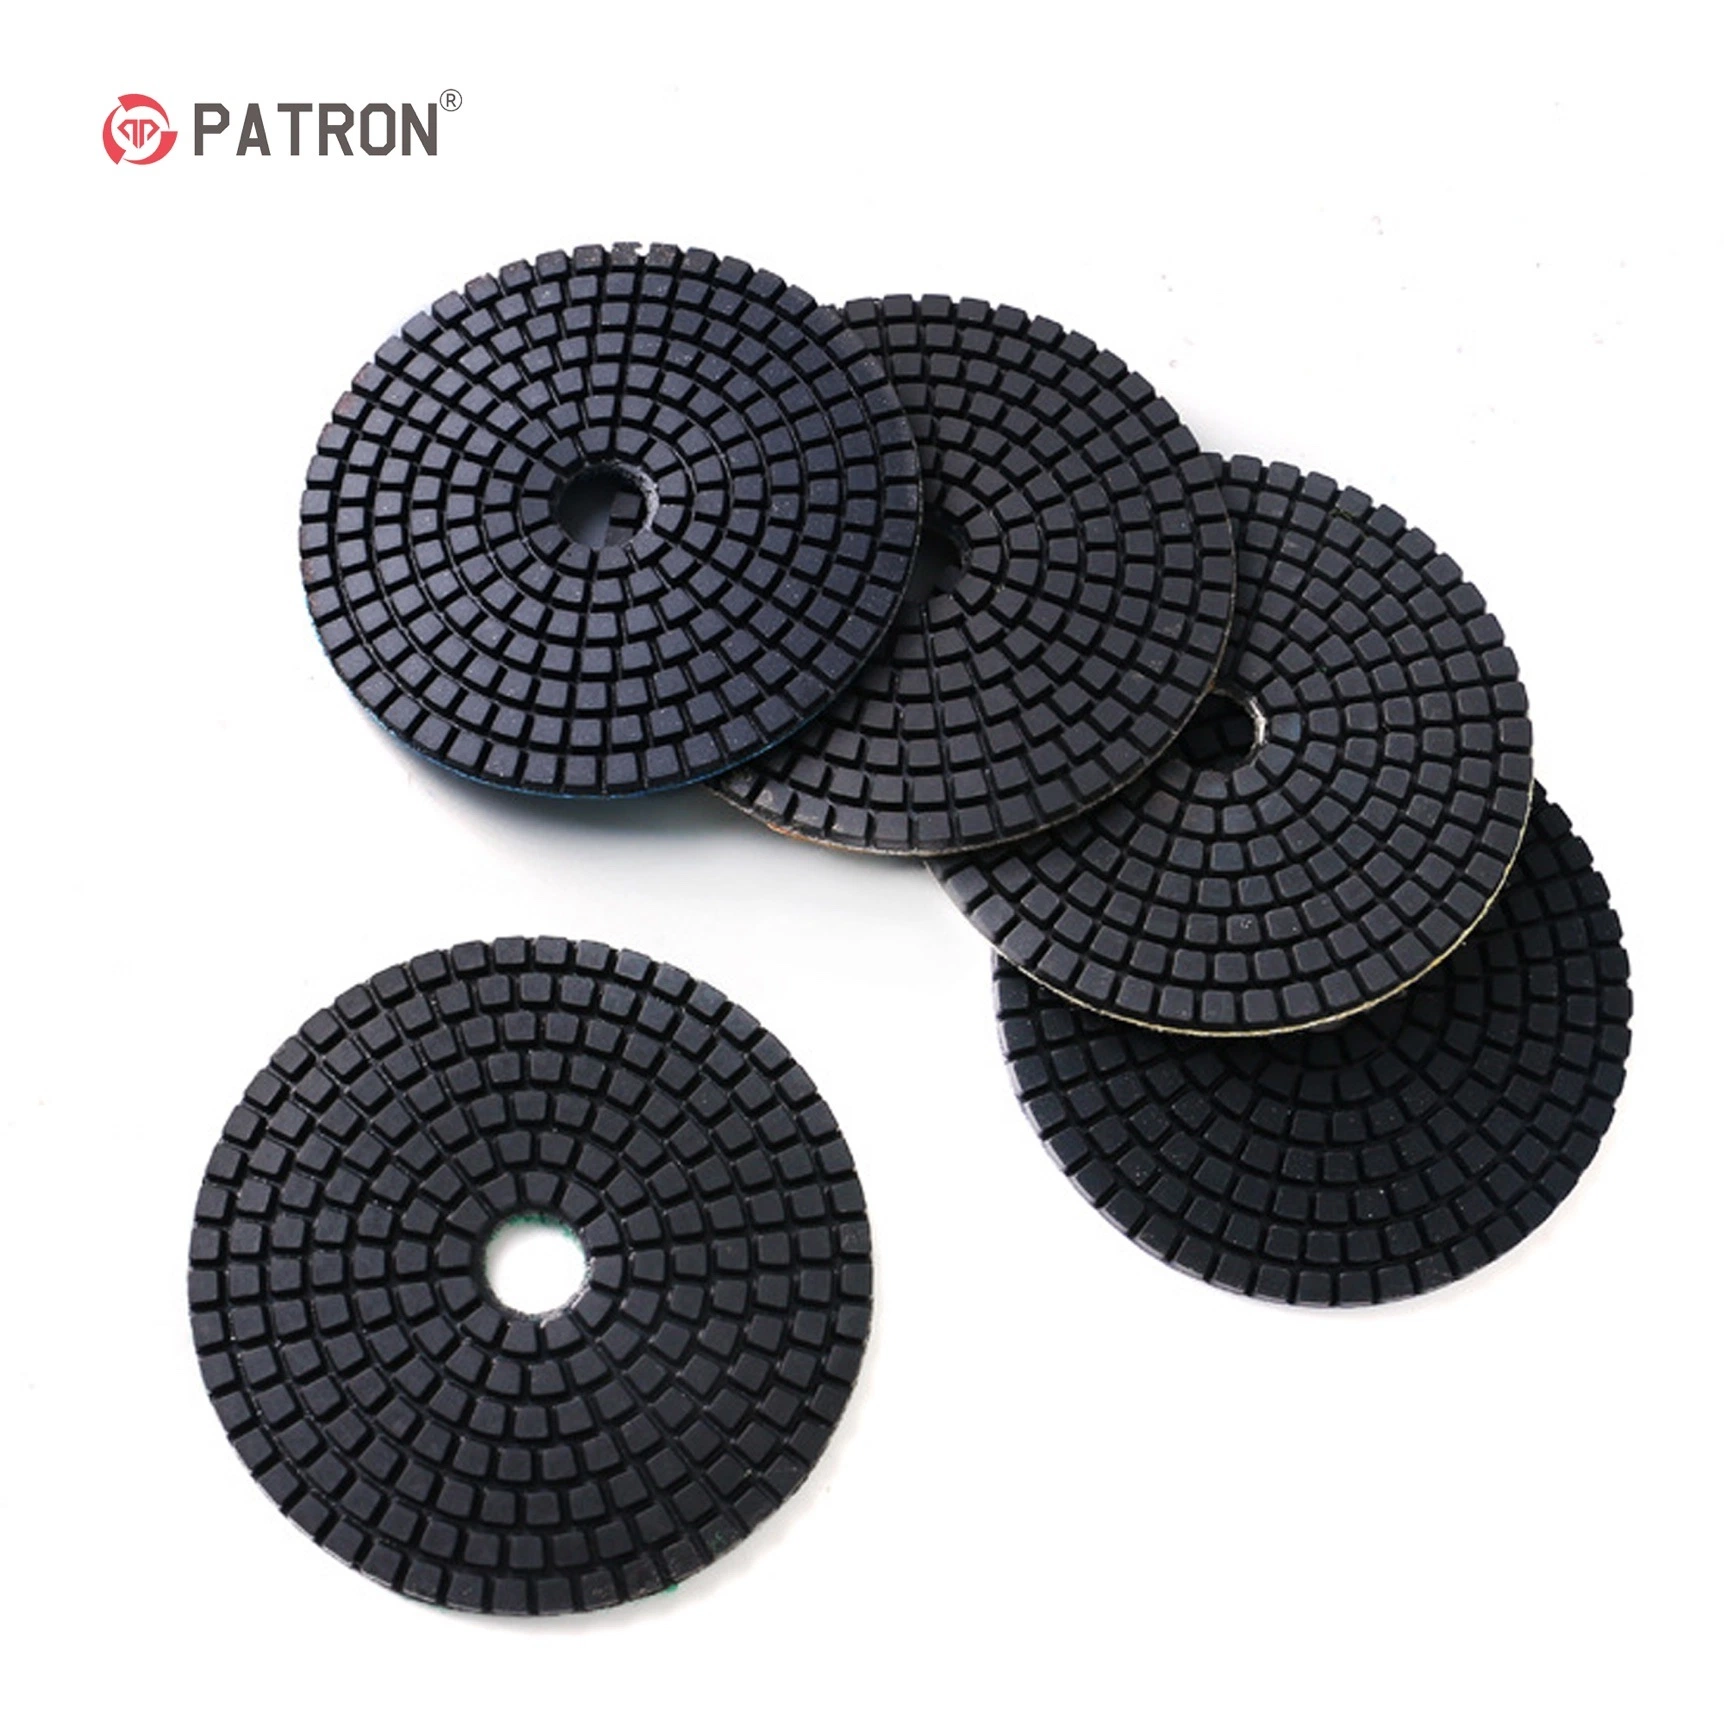 Dry Polishing Stone Pads No Water Diamond Tools for The Stone Angle Grinder Sandpaper